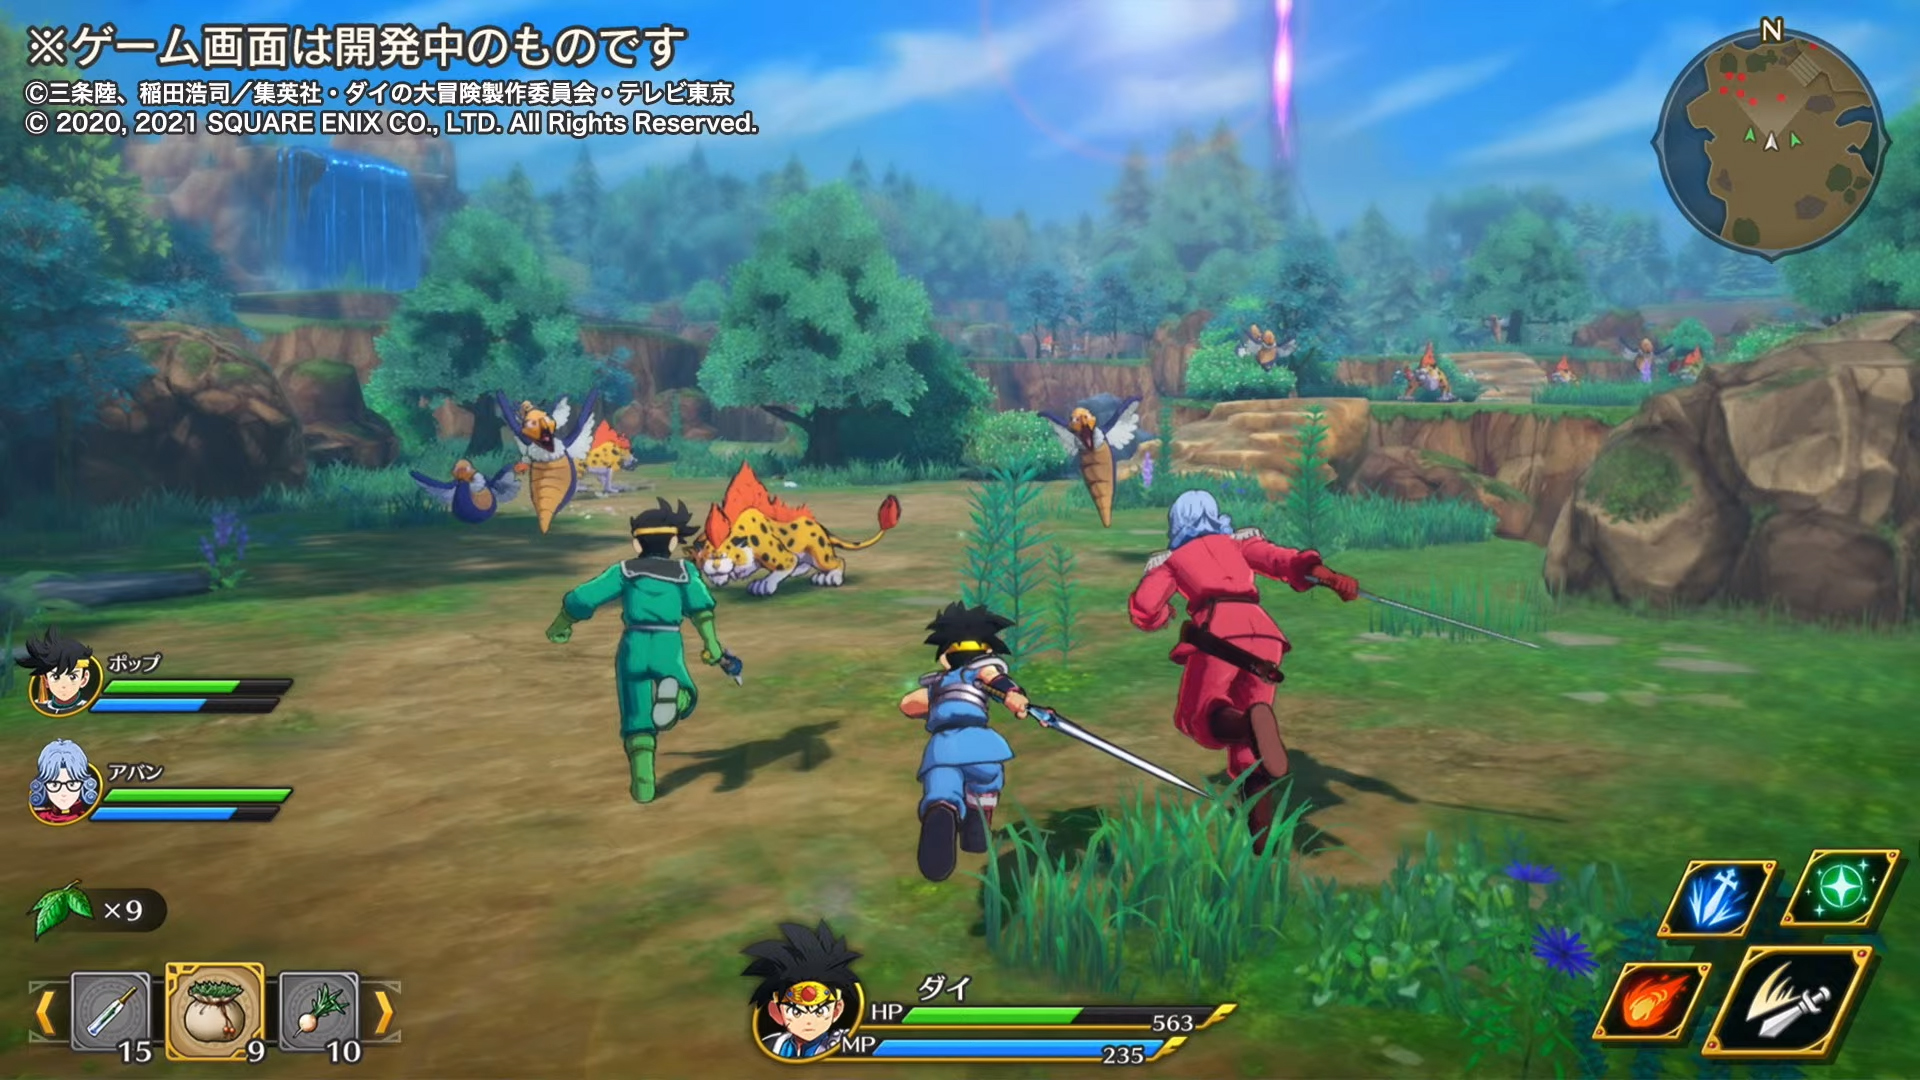 Adventure quest dragons. Dragon Quest XII: the Flames of Fate. Dragon Quest the Adventure of dai. Dragon Quest XII. Infinity Strash: Dragon Quest the Adventure of dai.